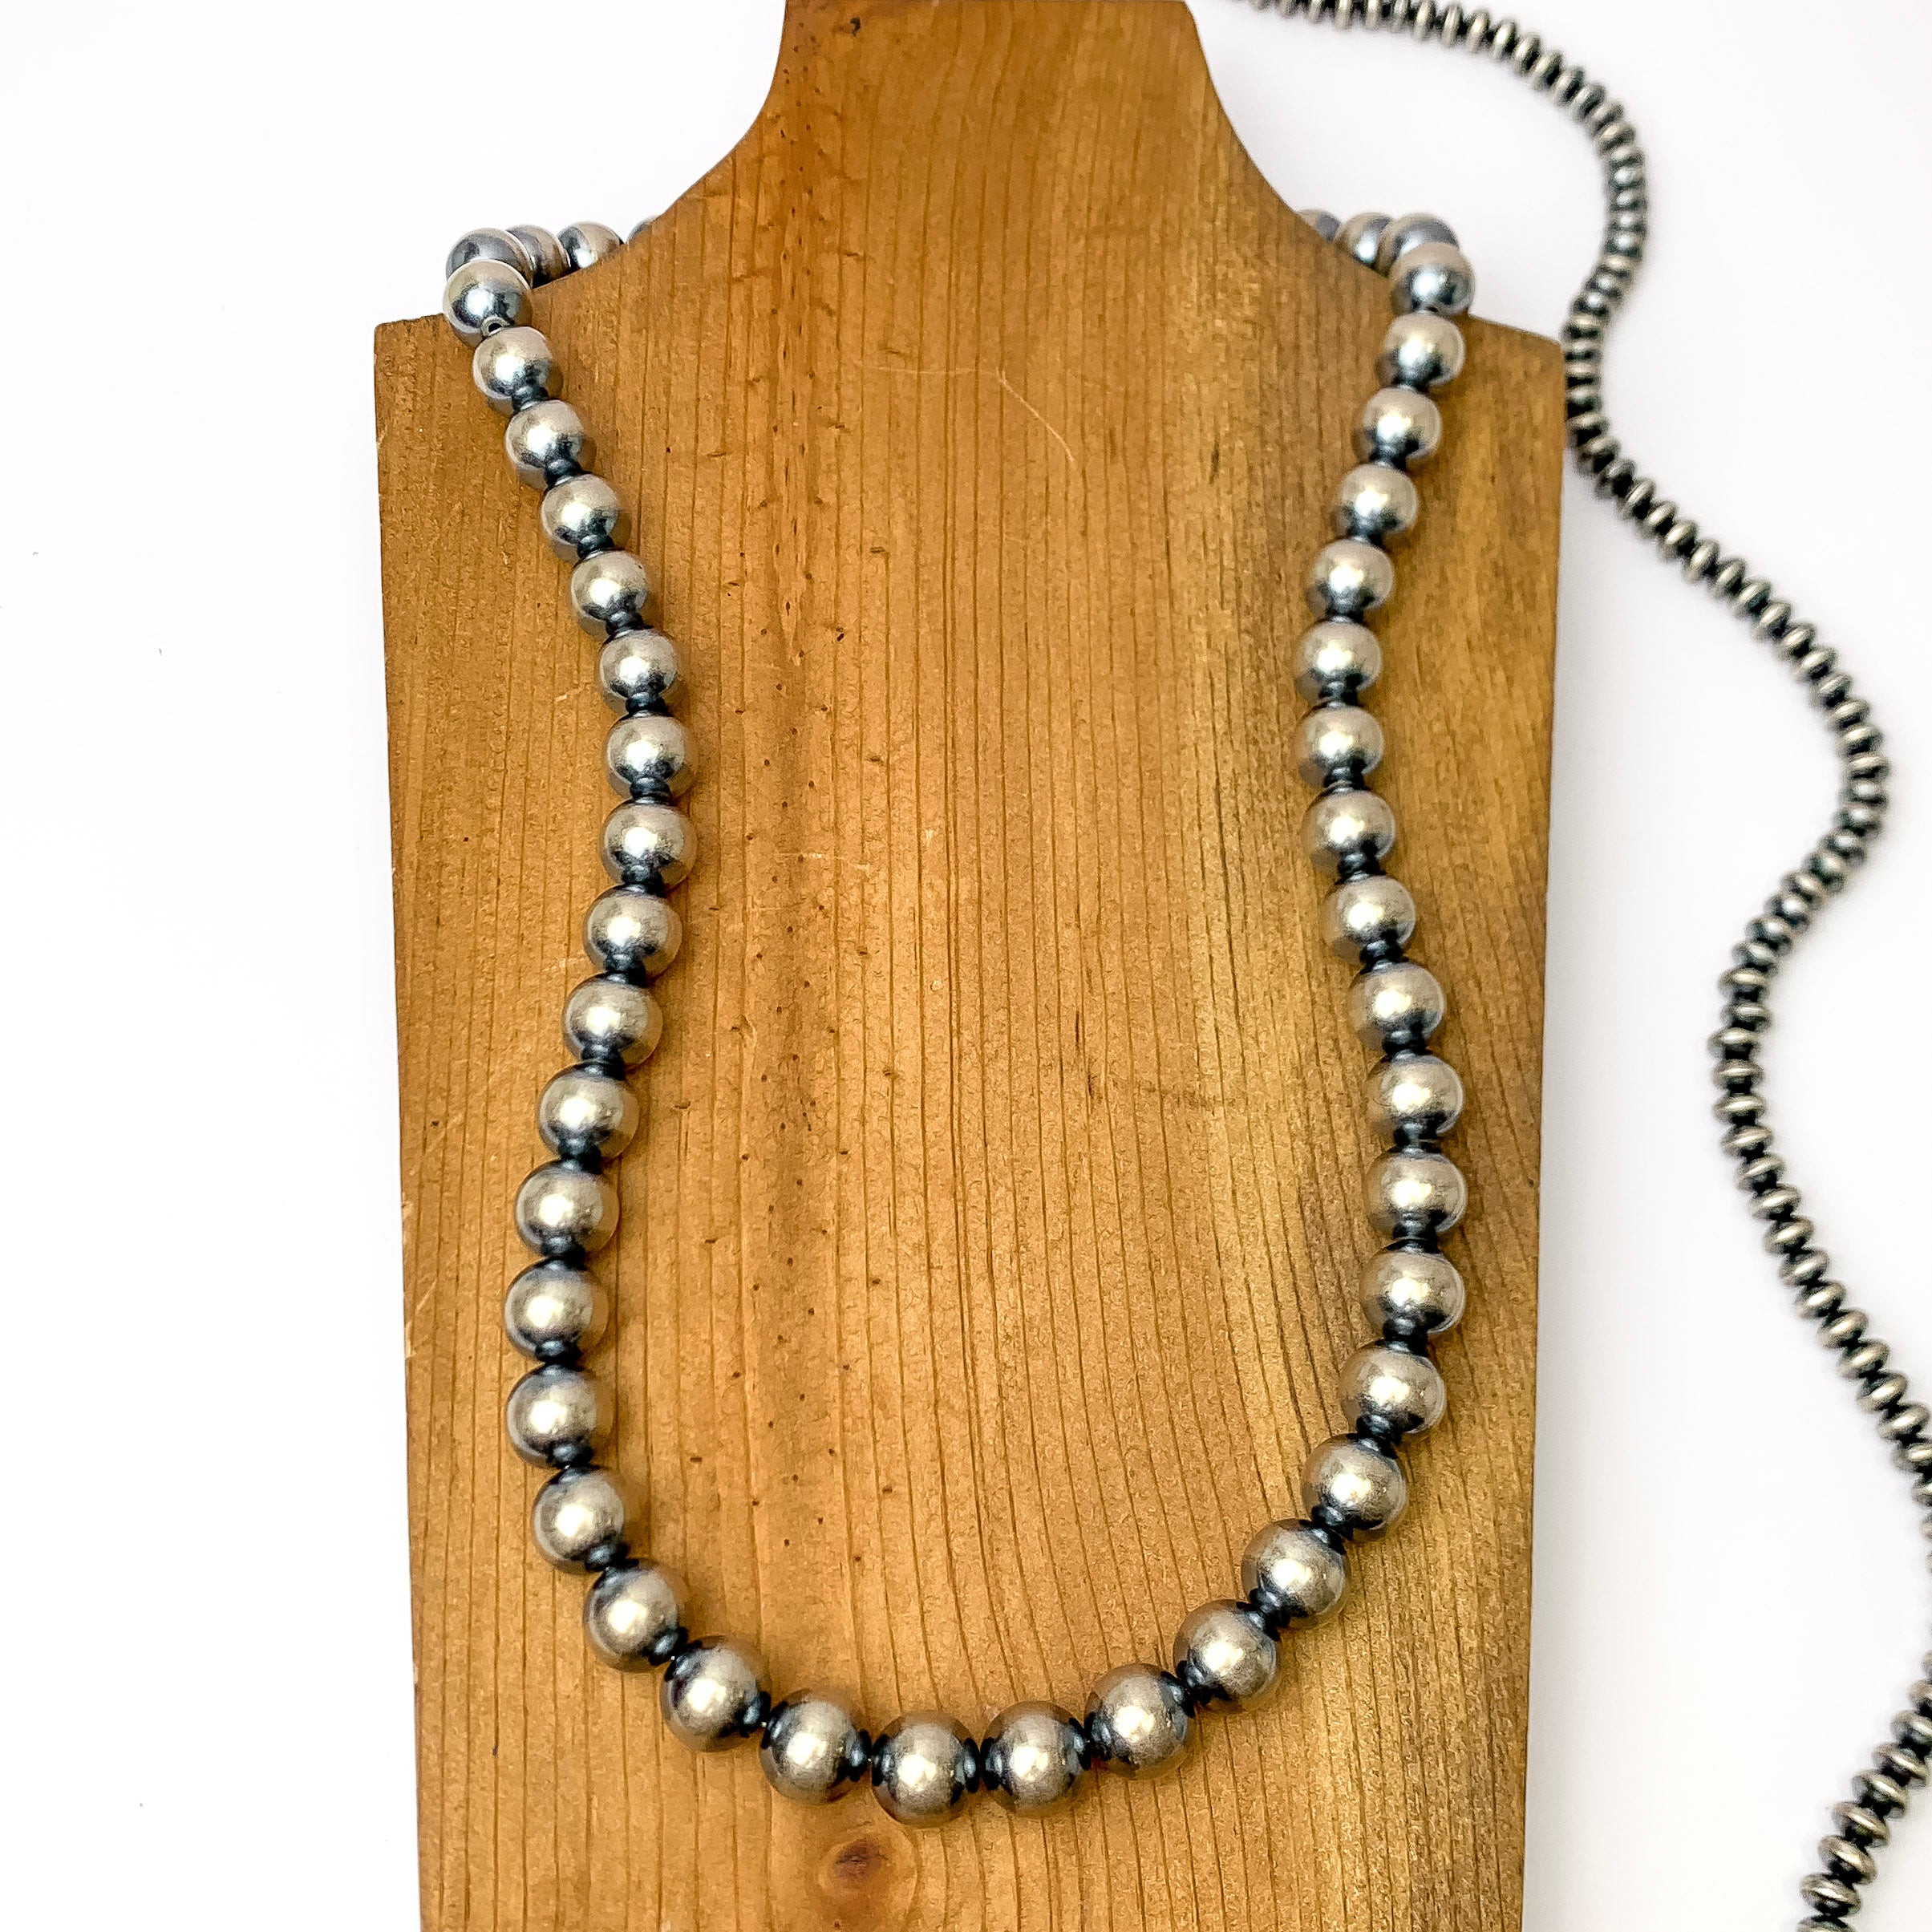 Centered in the picture is a large strand of navajo pearls on a wooden backdrop.